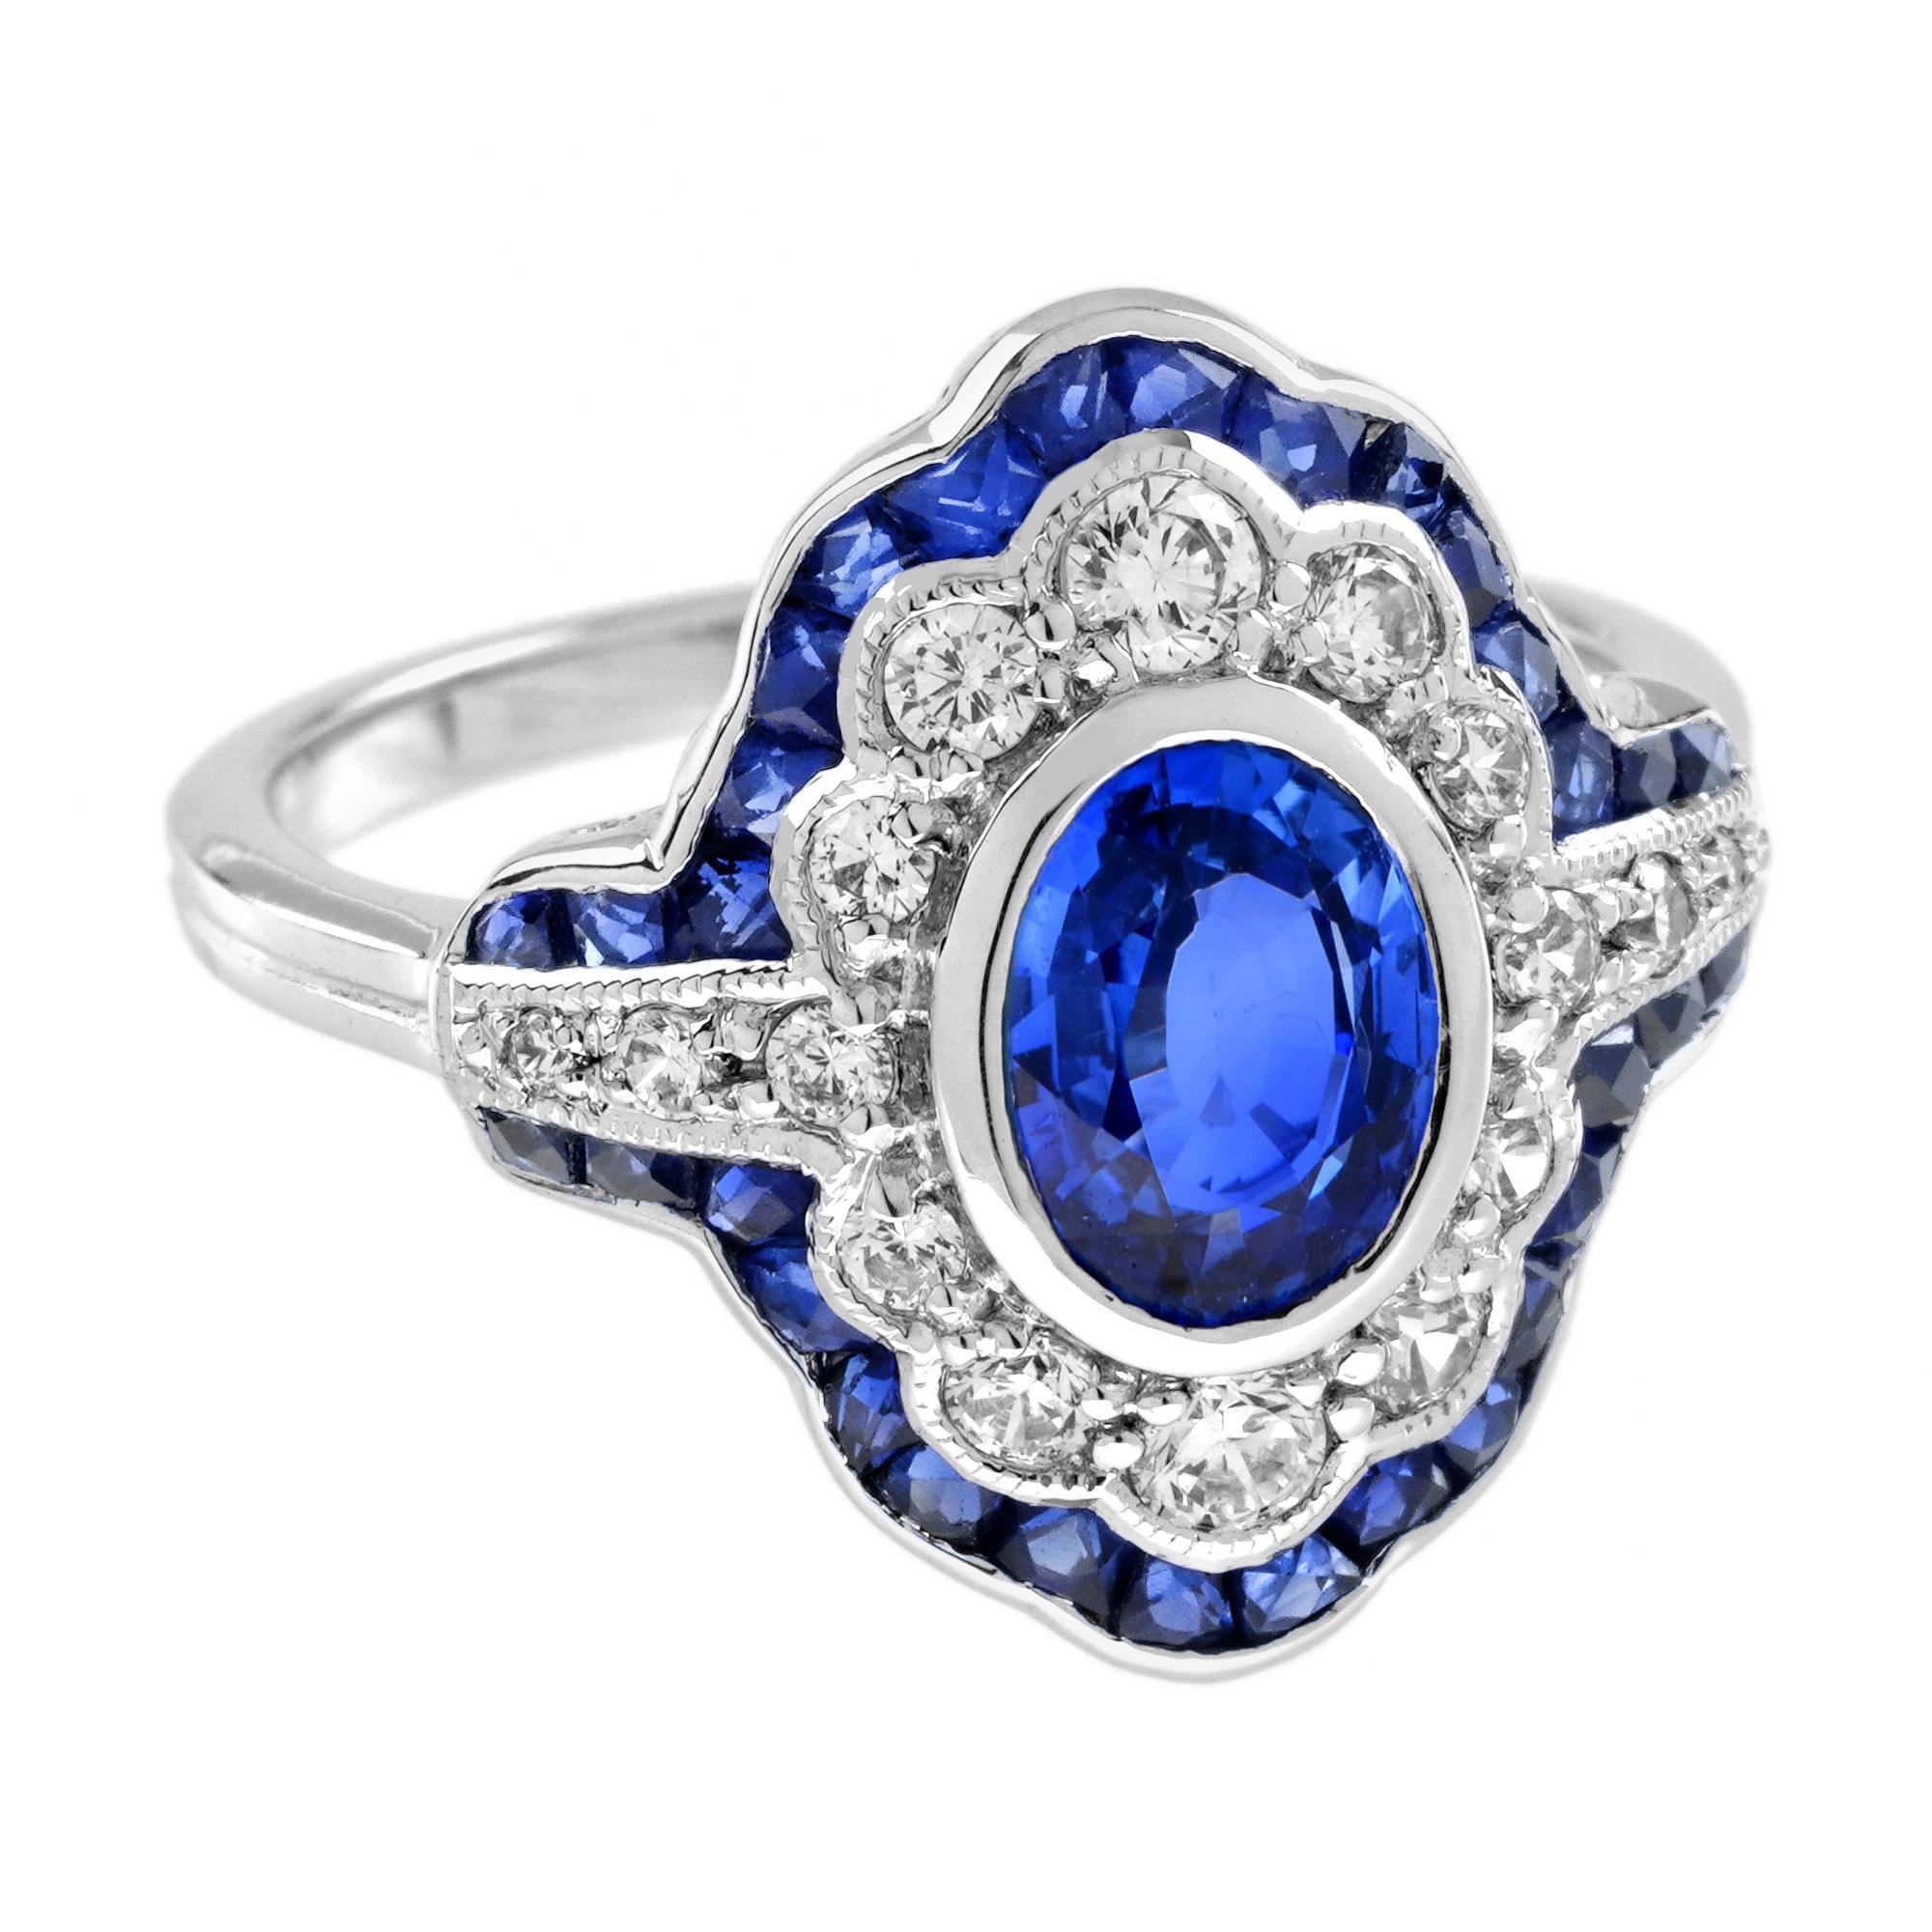 Oval Cut 1.6 Ct. Ceylon Sapphire Diamond Art Deco Style Engagement Ring in 18K White Gold For Sale